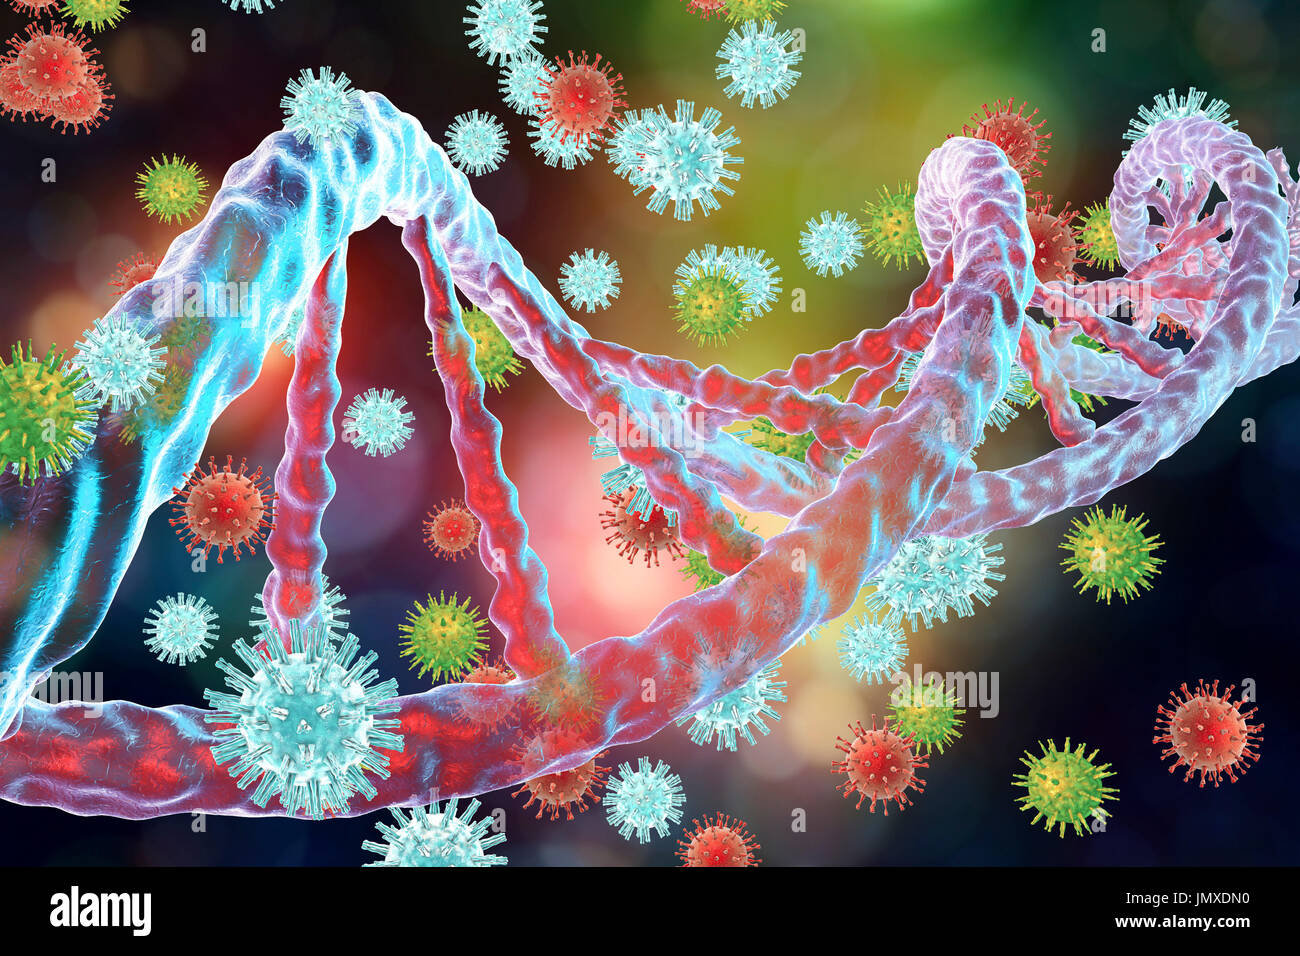 Conceptual image for interaction between viruses and host-cell DNA (deoxyribonucleic acid). Integration of viruses into DNA is the key step in oncogenesis. Several viruses, such as hepatitis B virus, papillomavirus and other, can integrate into host DNA as insertional mutagens causing the activation of a cellular proto-oncogene which eventually leads to uncontrolled cell multiplication and cancer development. Stock Photo